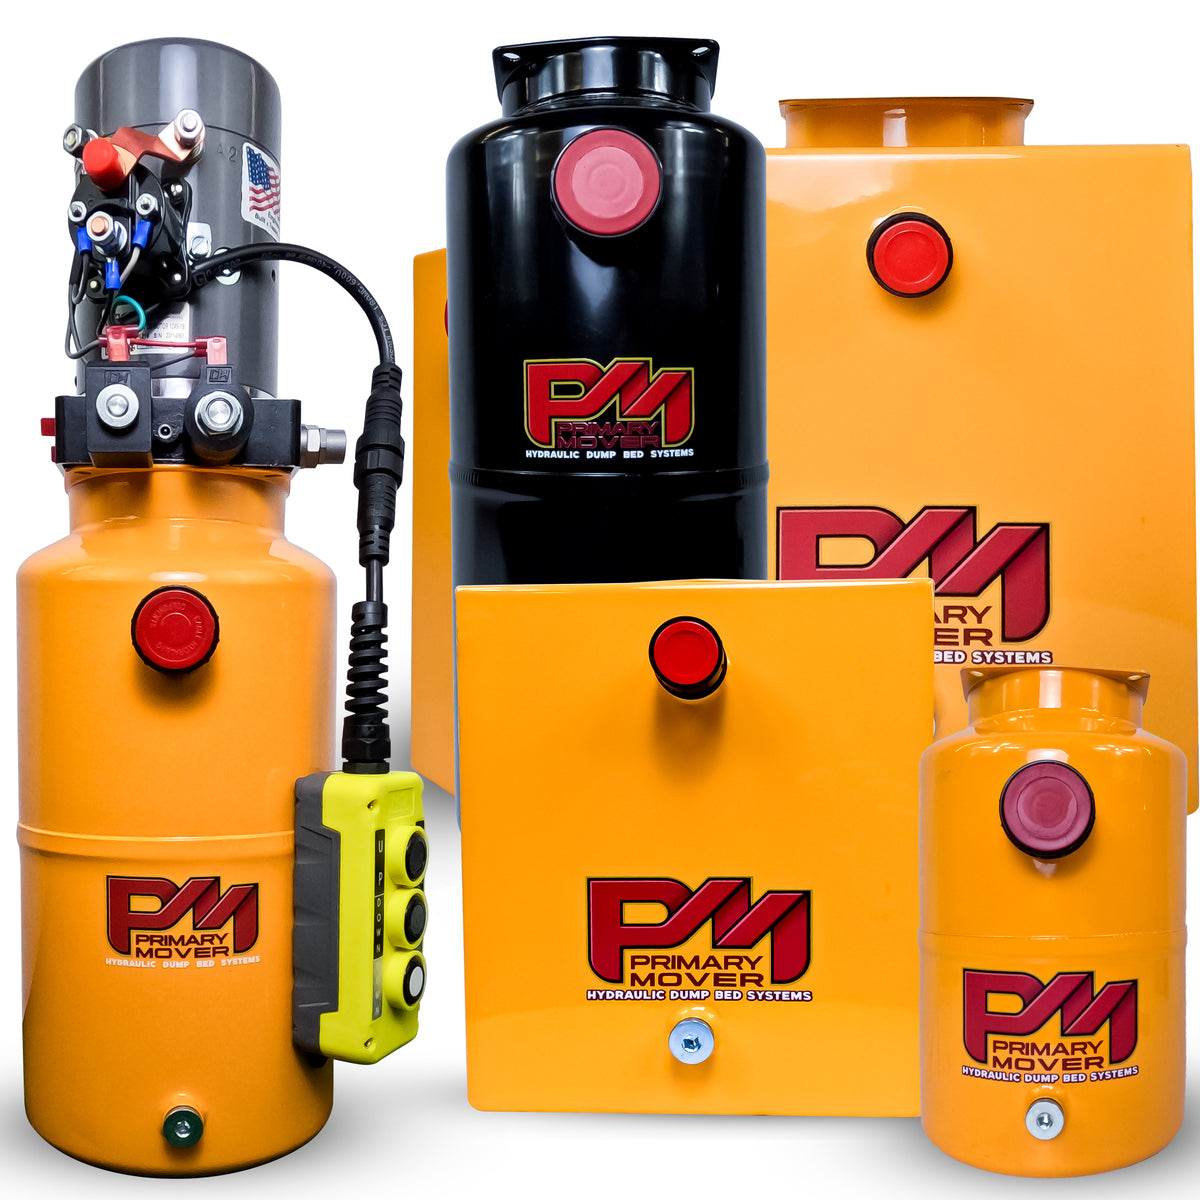 KTI 12V Double-Acting Hydraulic Pump - Steel Reservoir, featuring robust yellow and black containers, durable construction, and multiple reservoir sizes for efficient heavy-duty hydraulic applications.